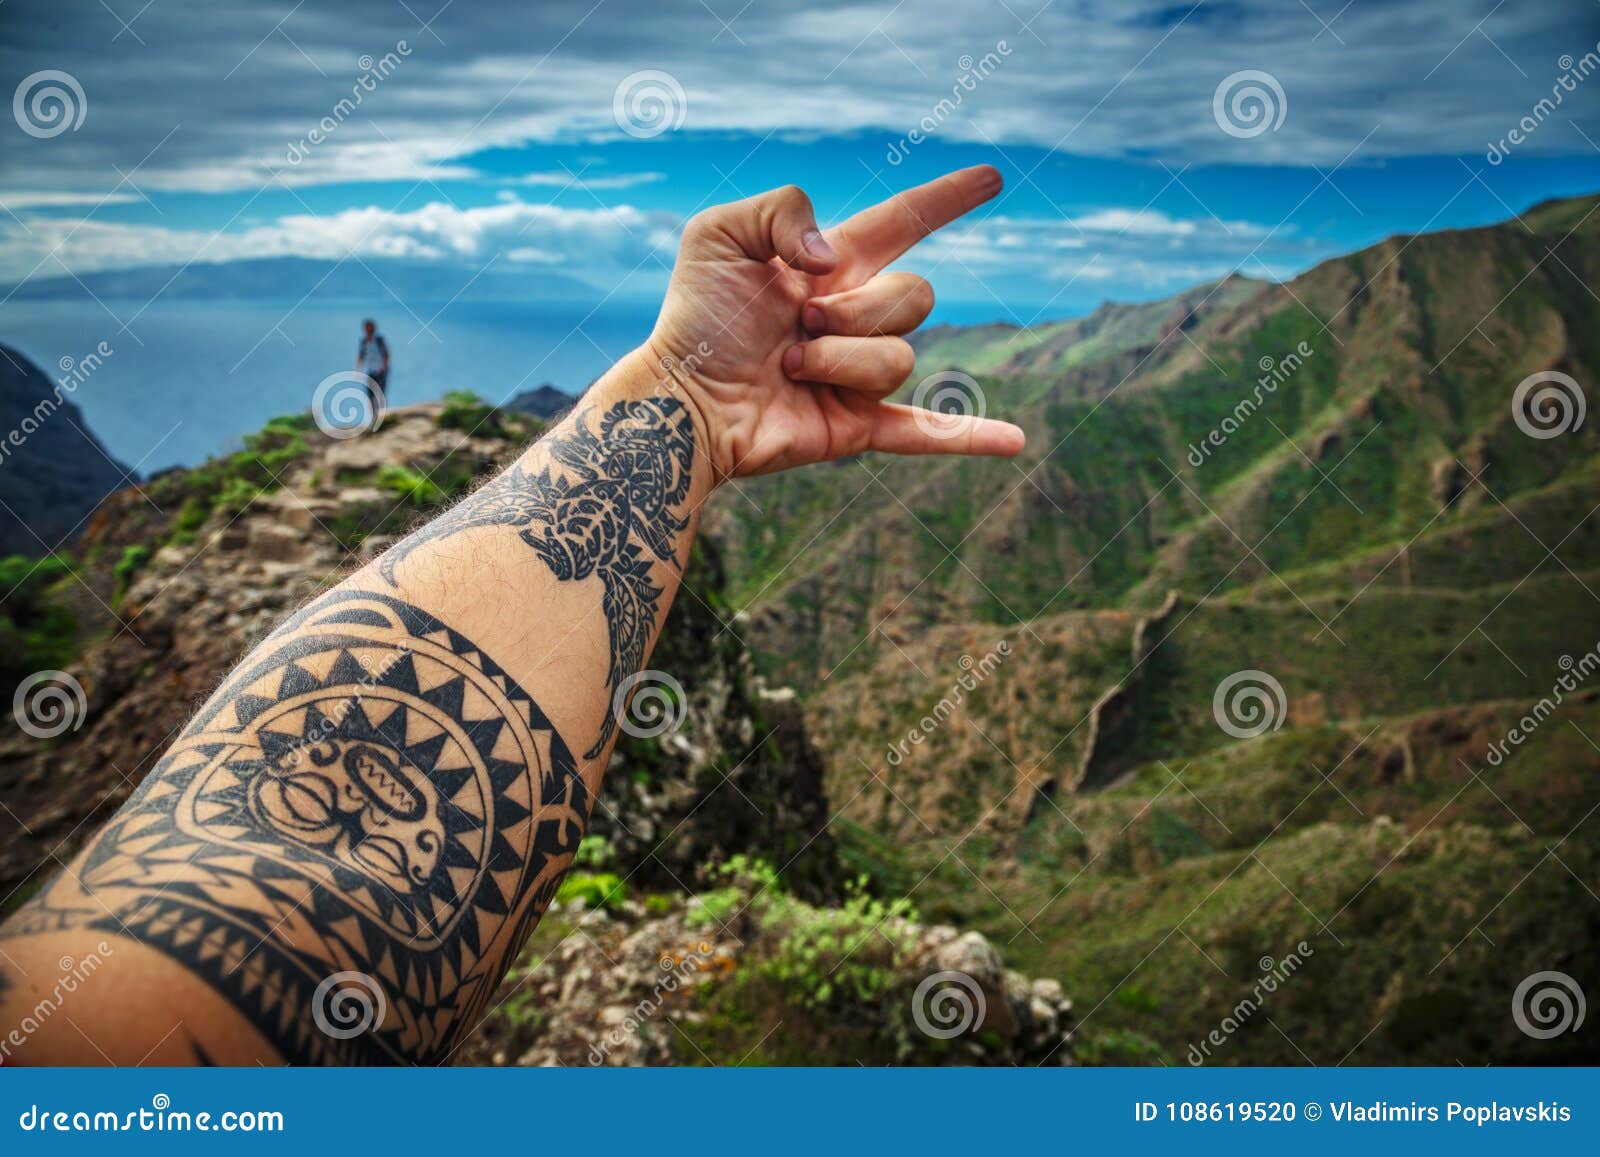 background beautiful mountain landscape man s hand showing rock onsign against 108619520